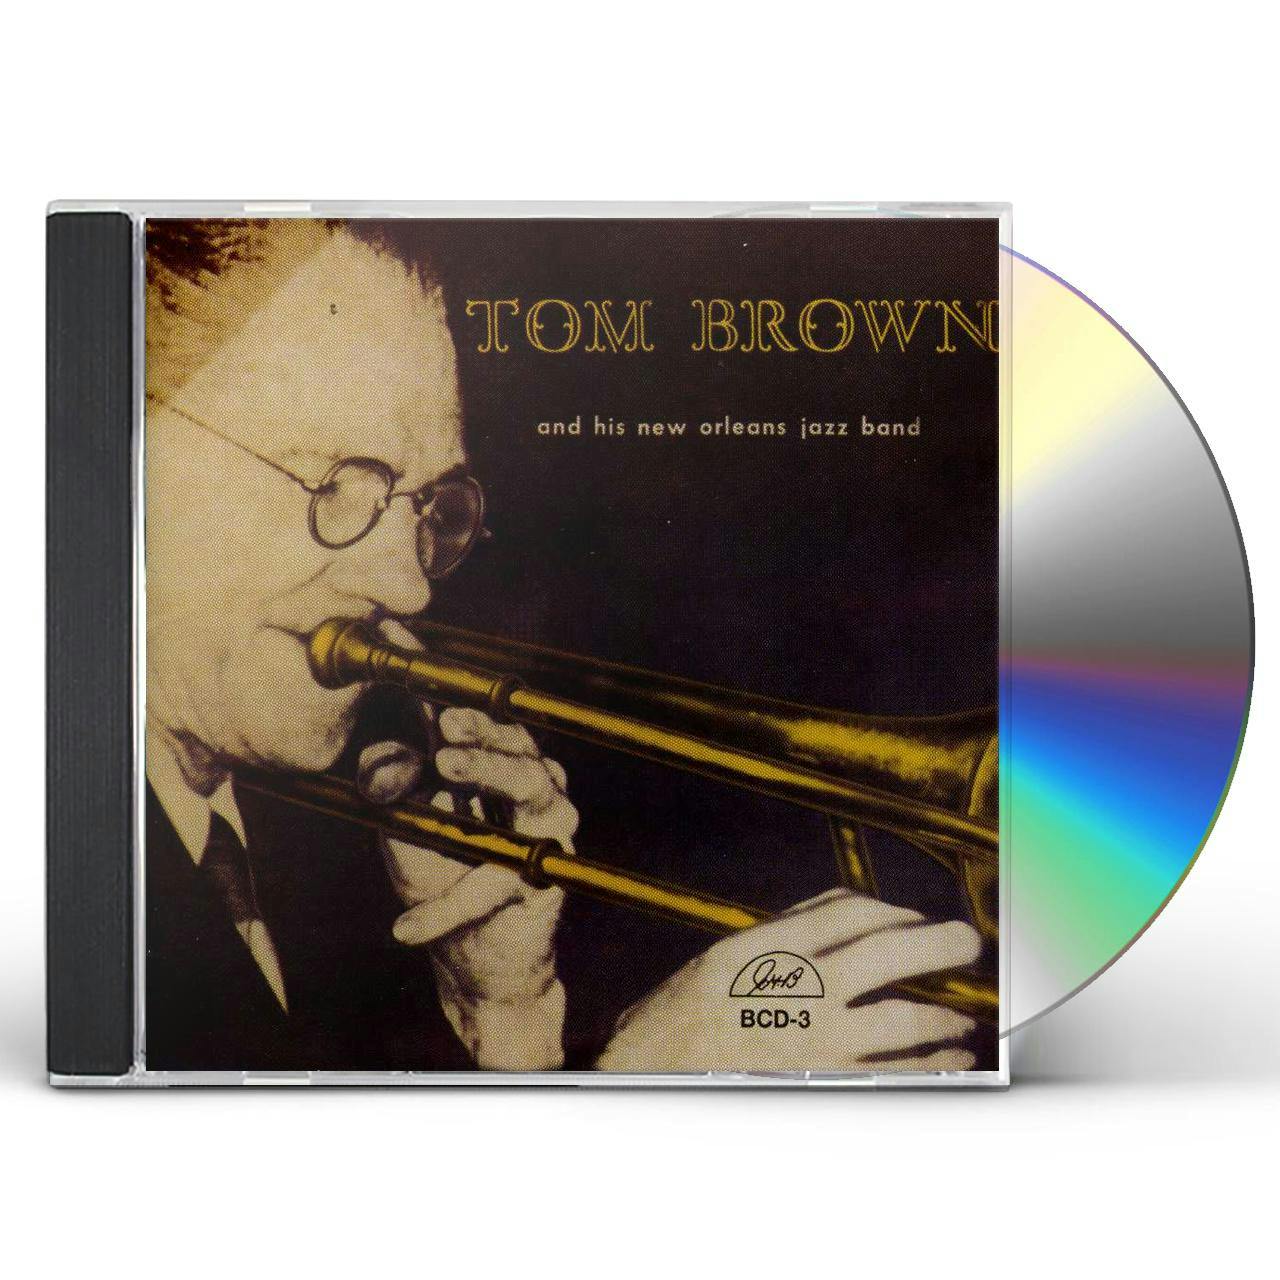 Brown　ORLEANS　JAZZ　Tom　CD　NEW　BAND